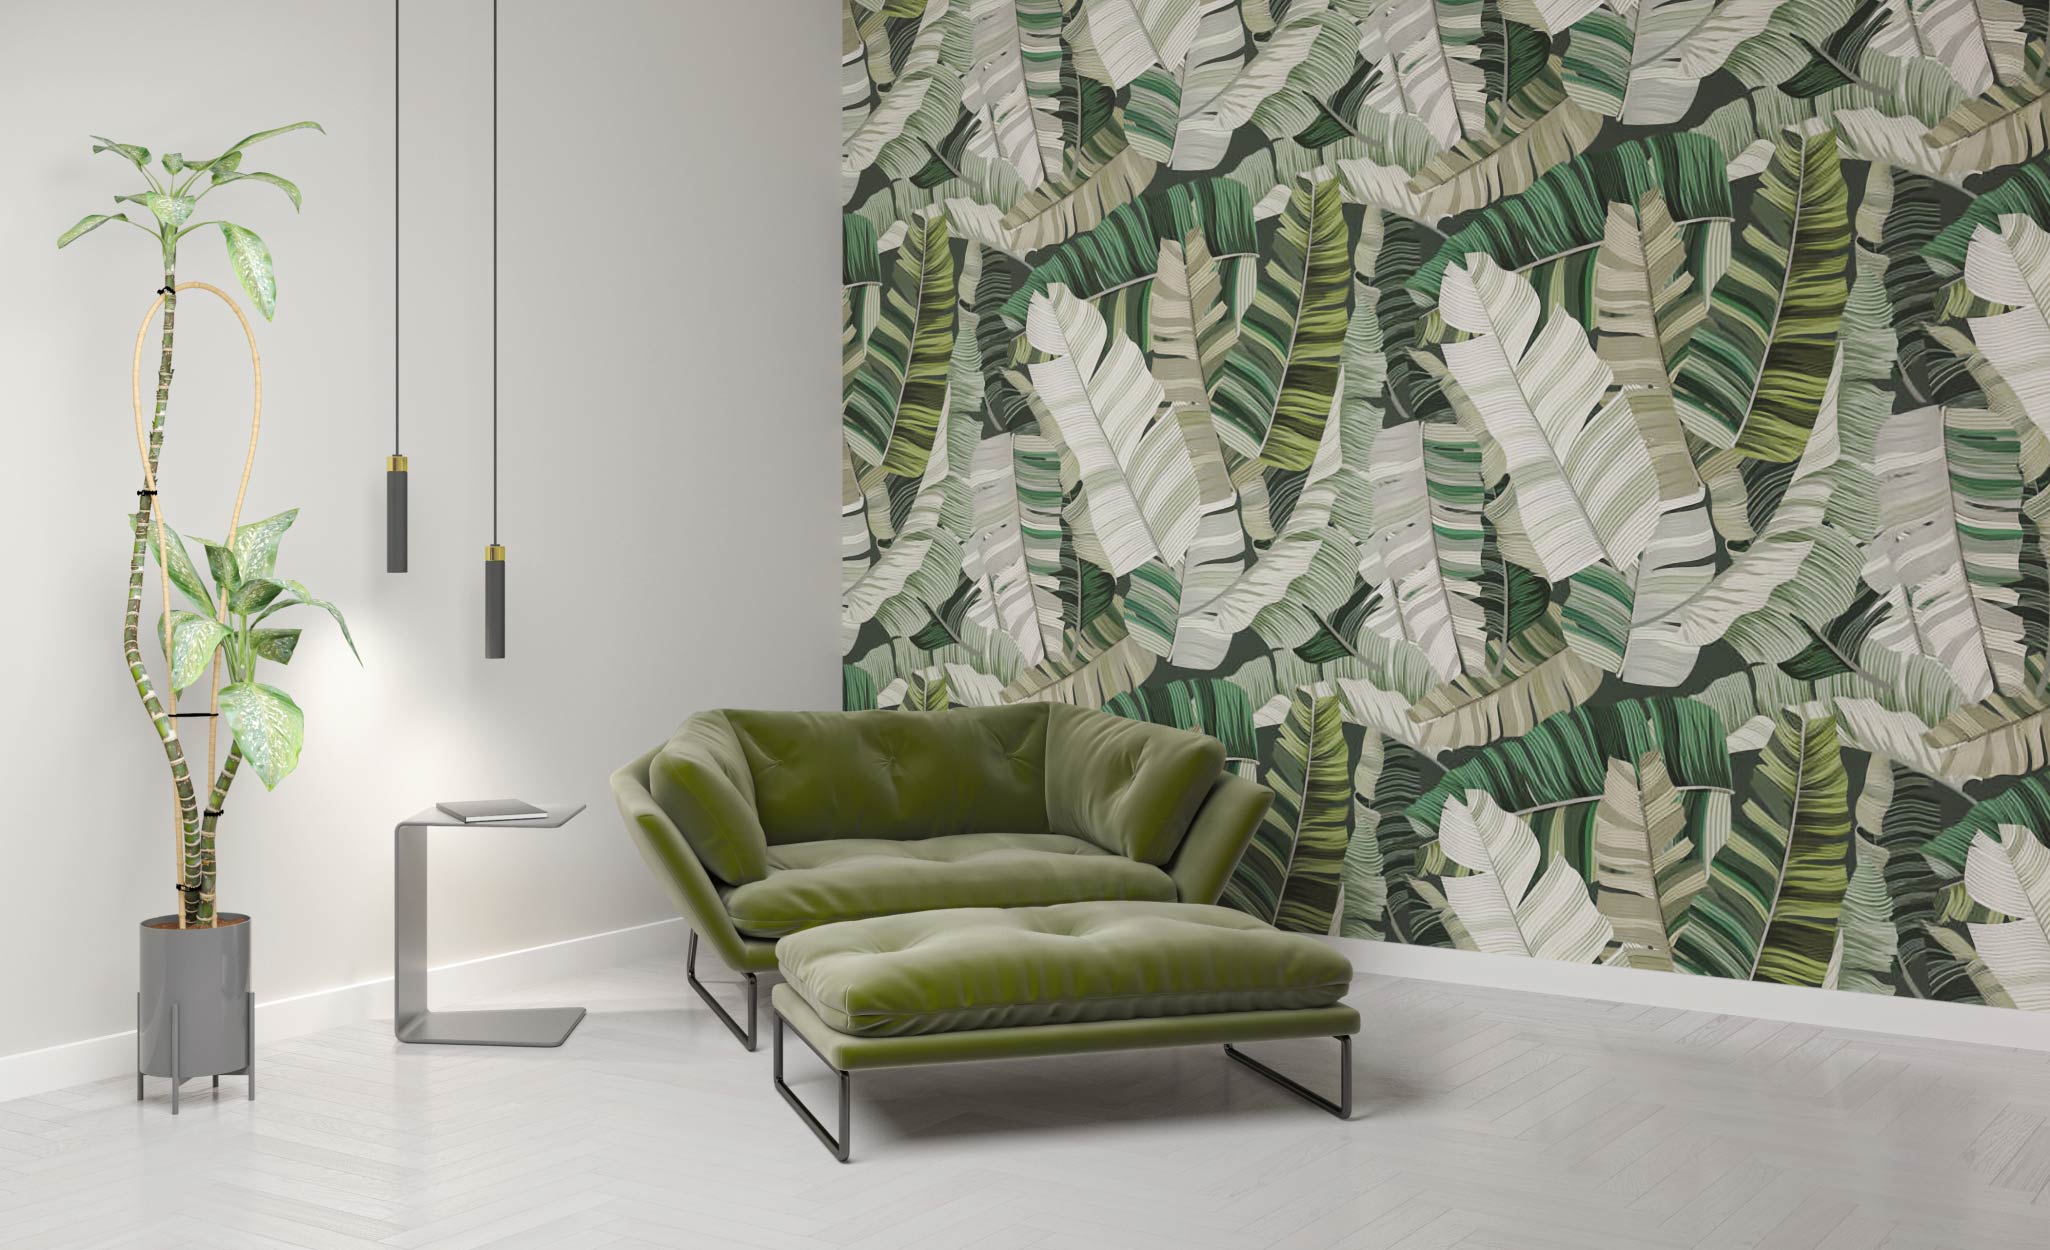 Green upholstery, live plants and forest patterns decorate a room.